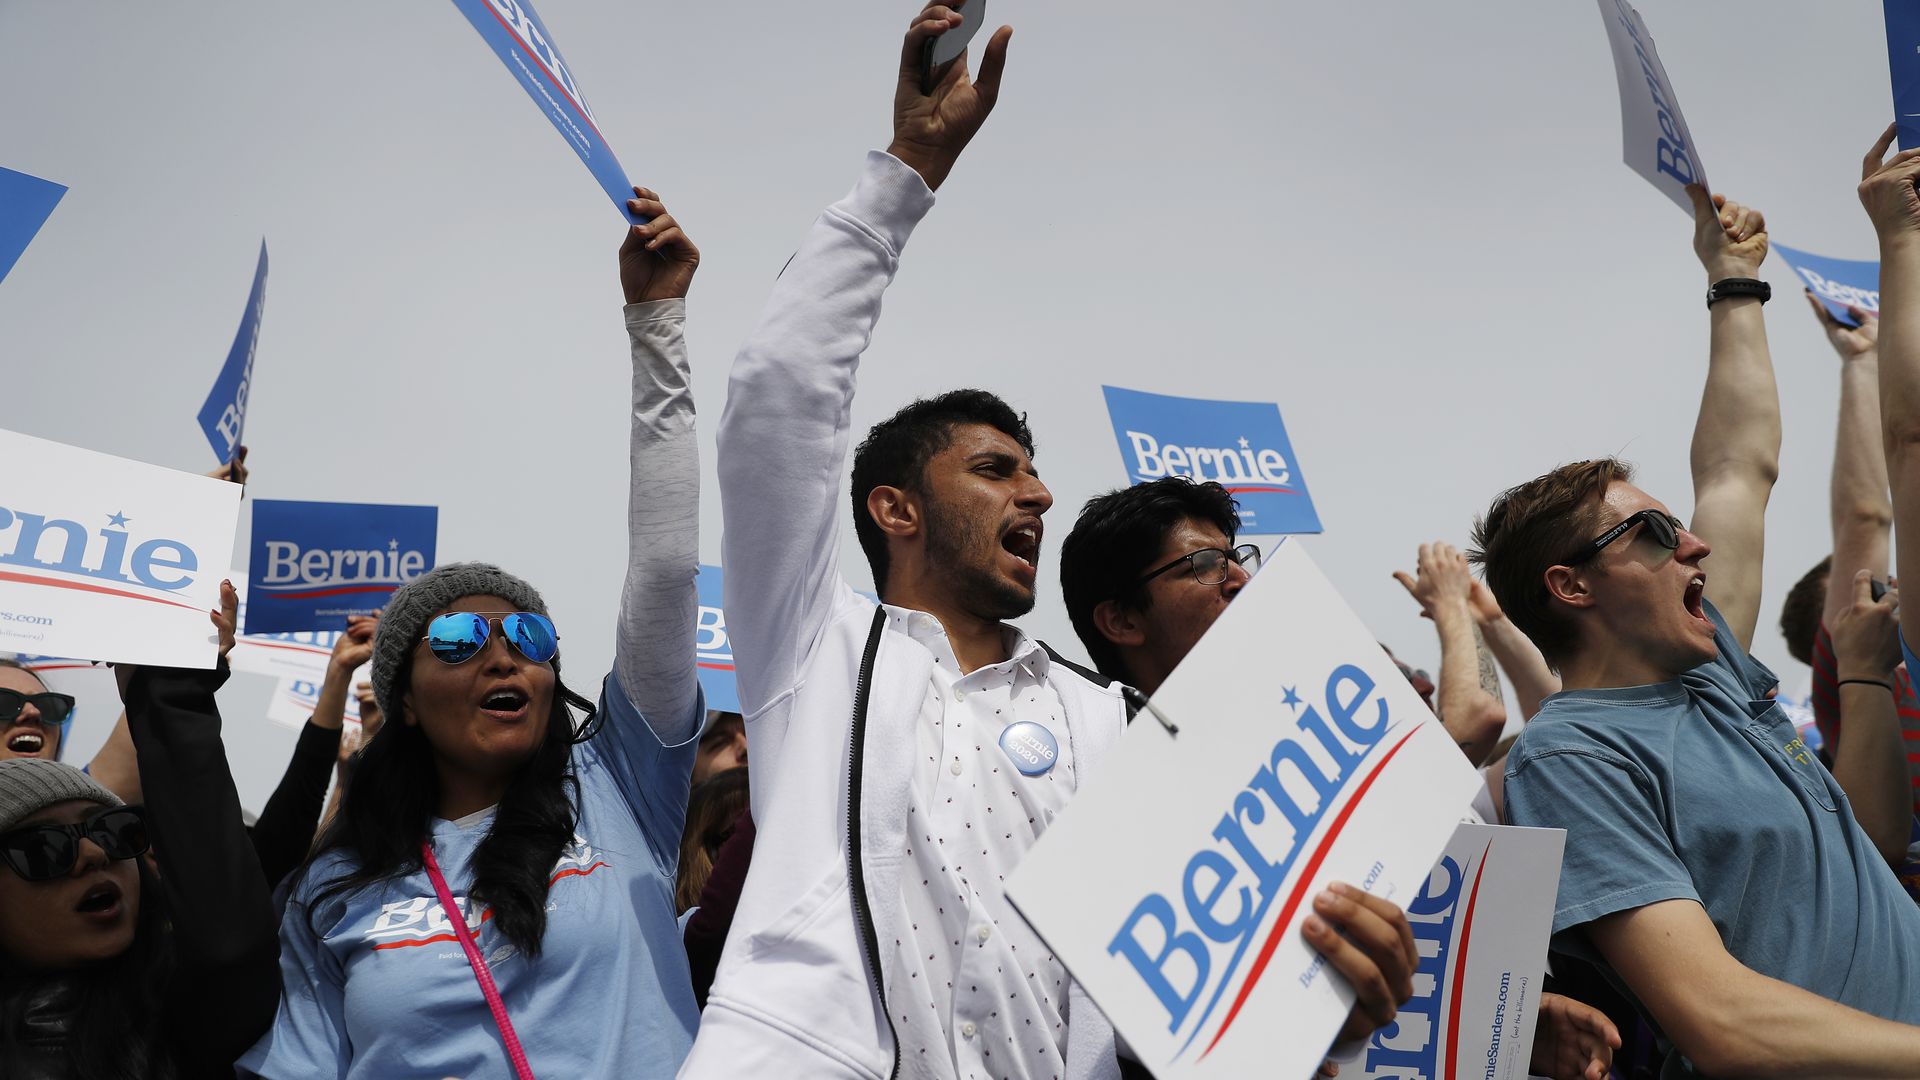 Young people hold signs for Bernie Sanders at rally